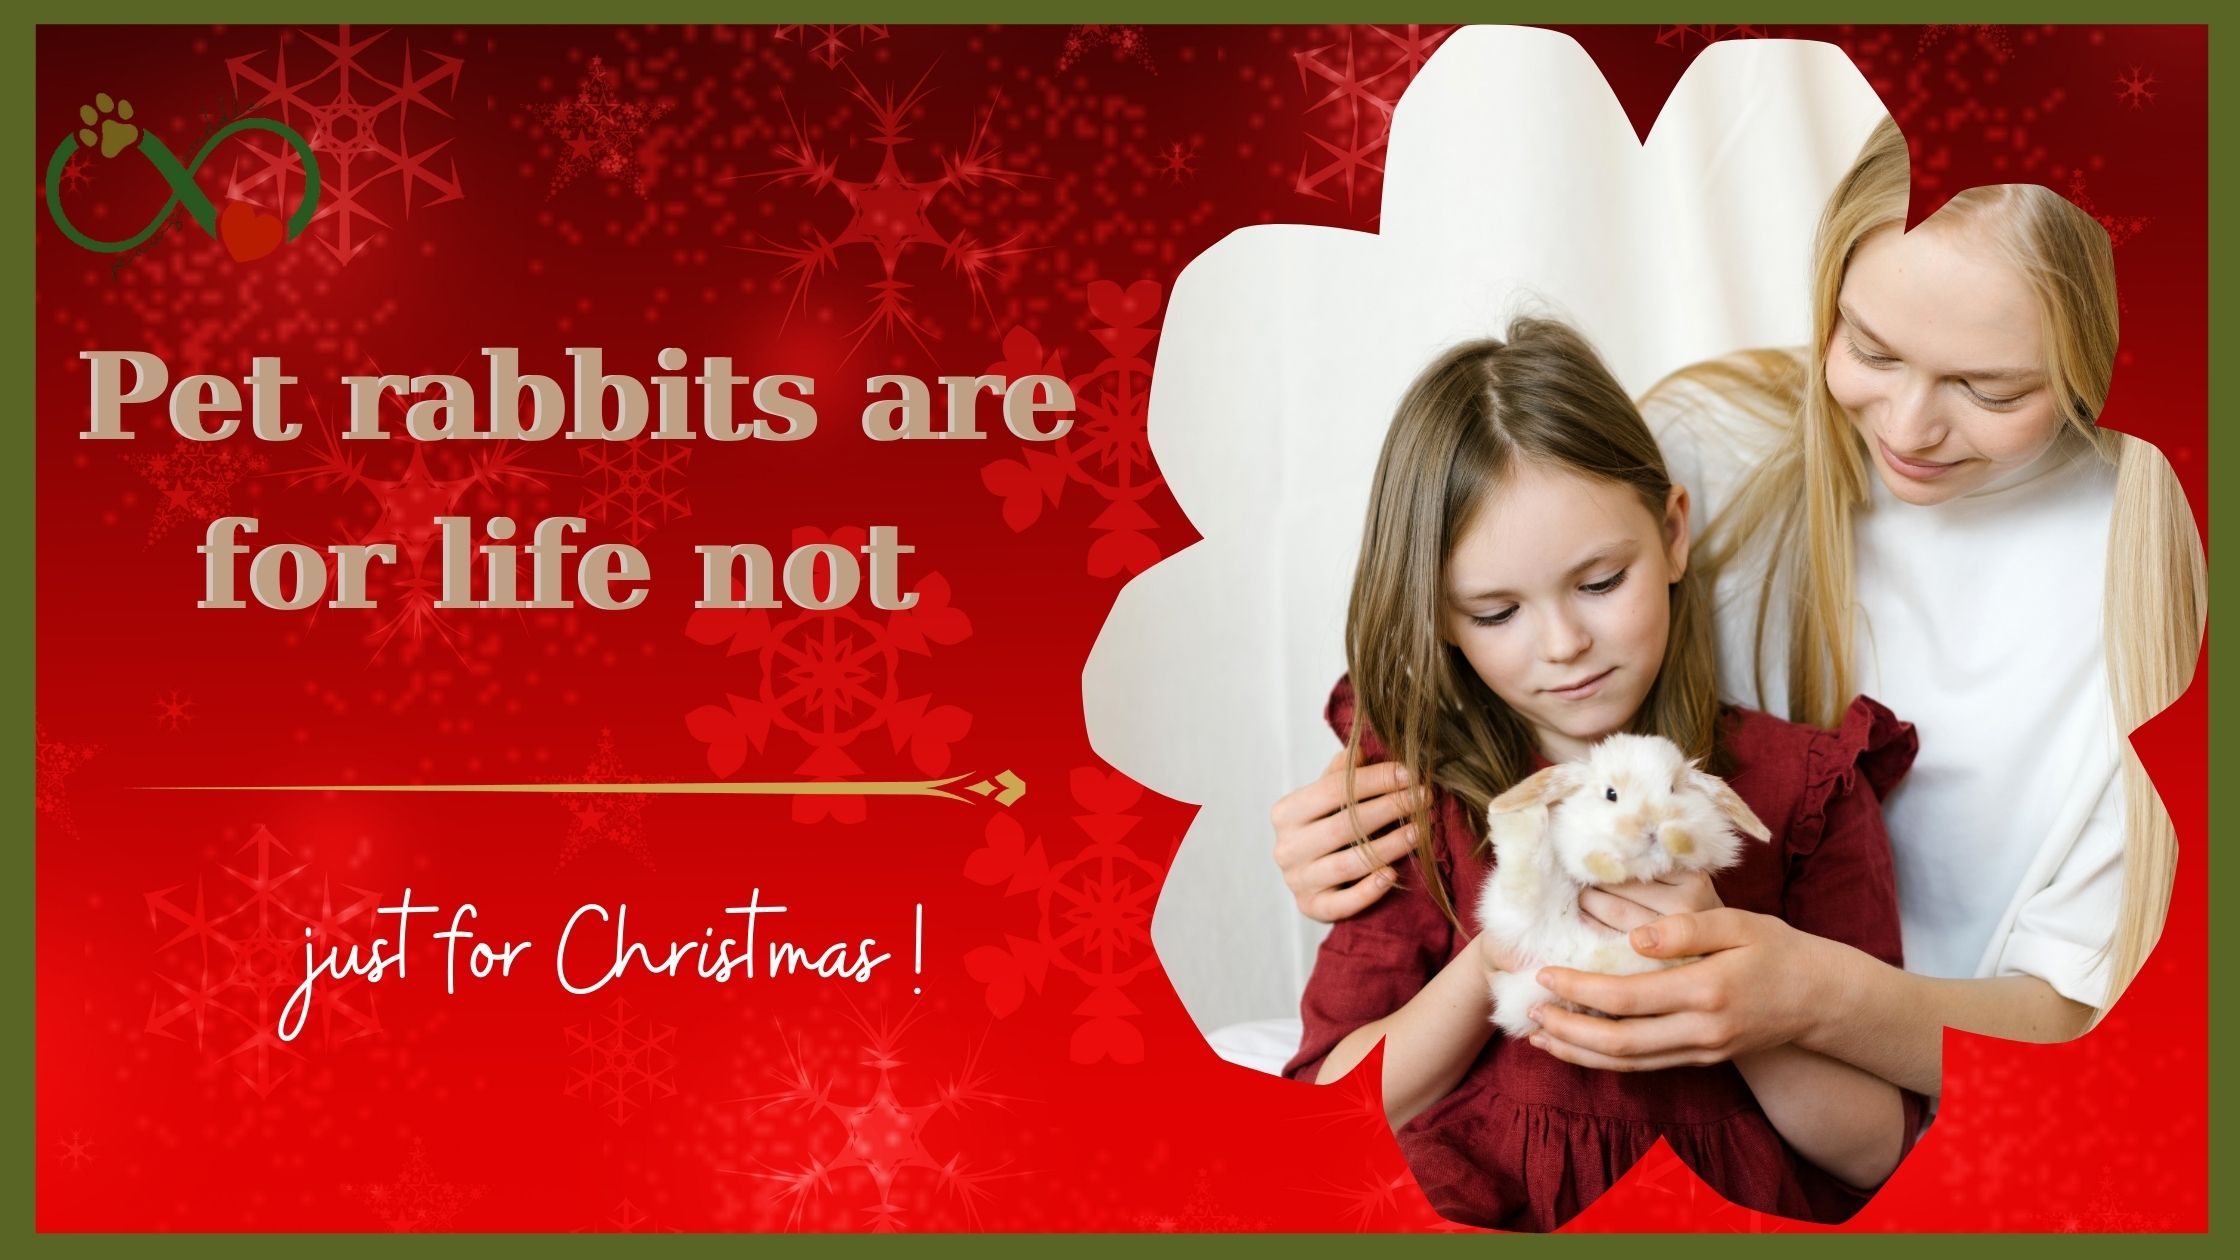 Pet rabbits are for life not just for Christmas !